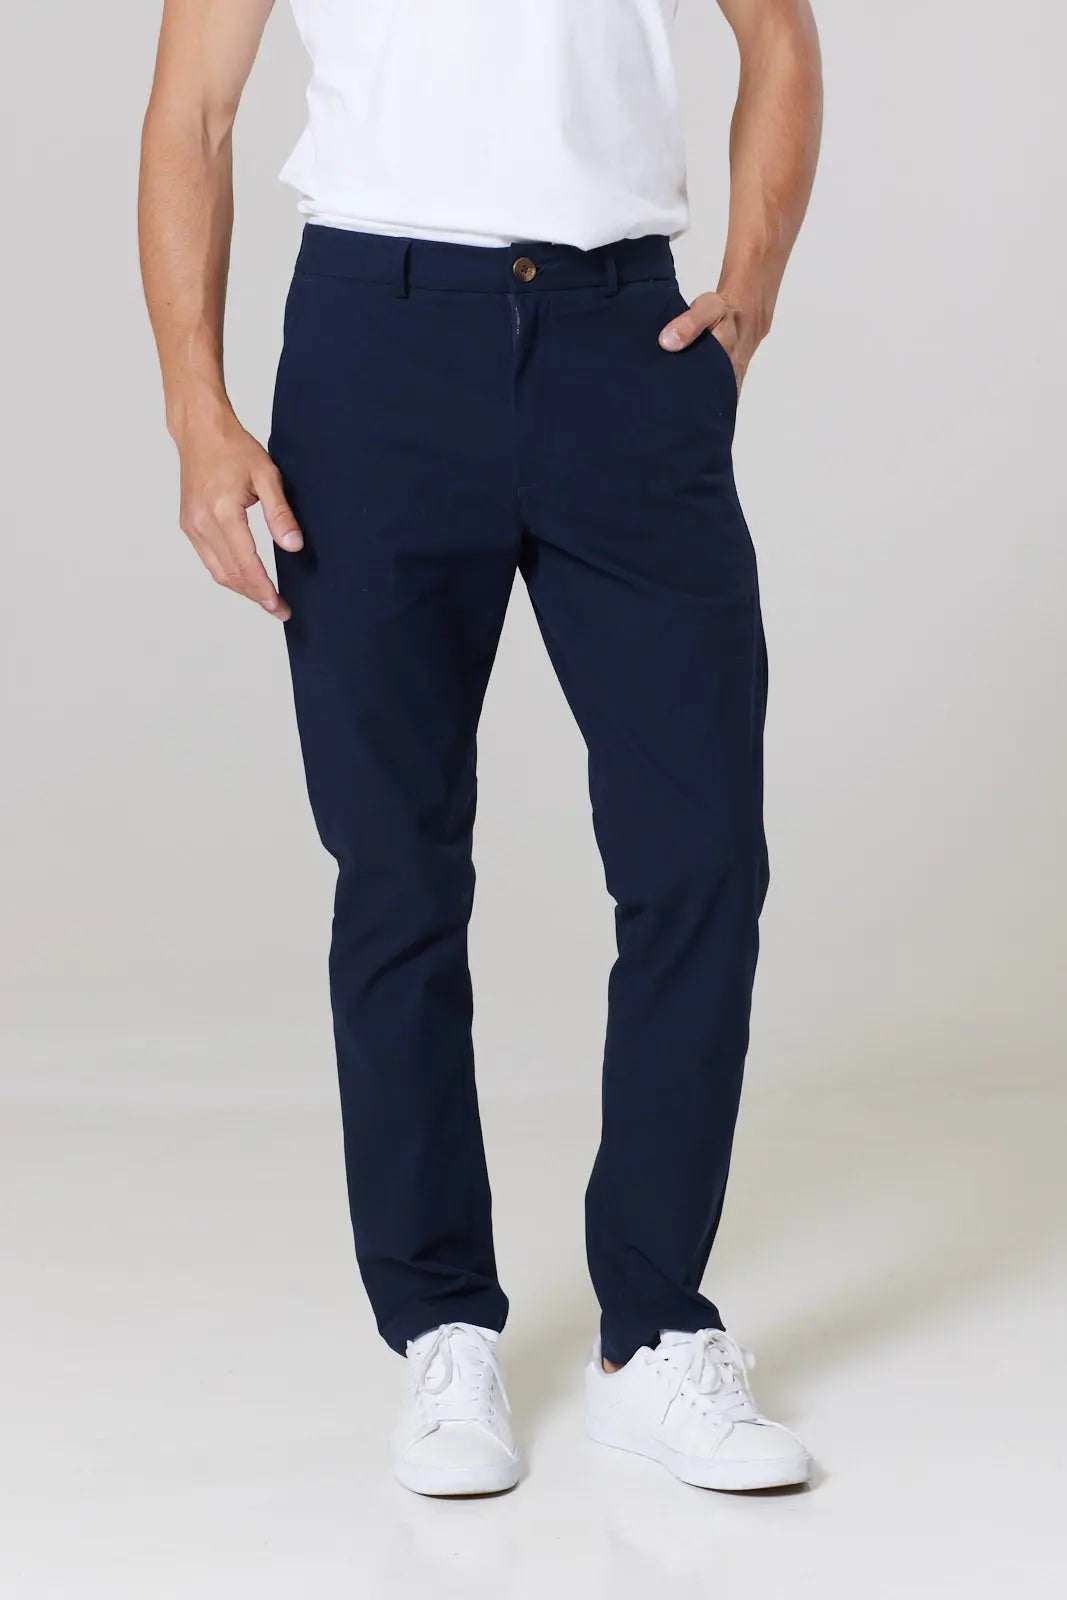 Buxton Trousers - Navy